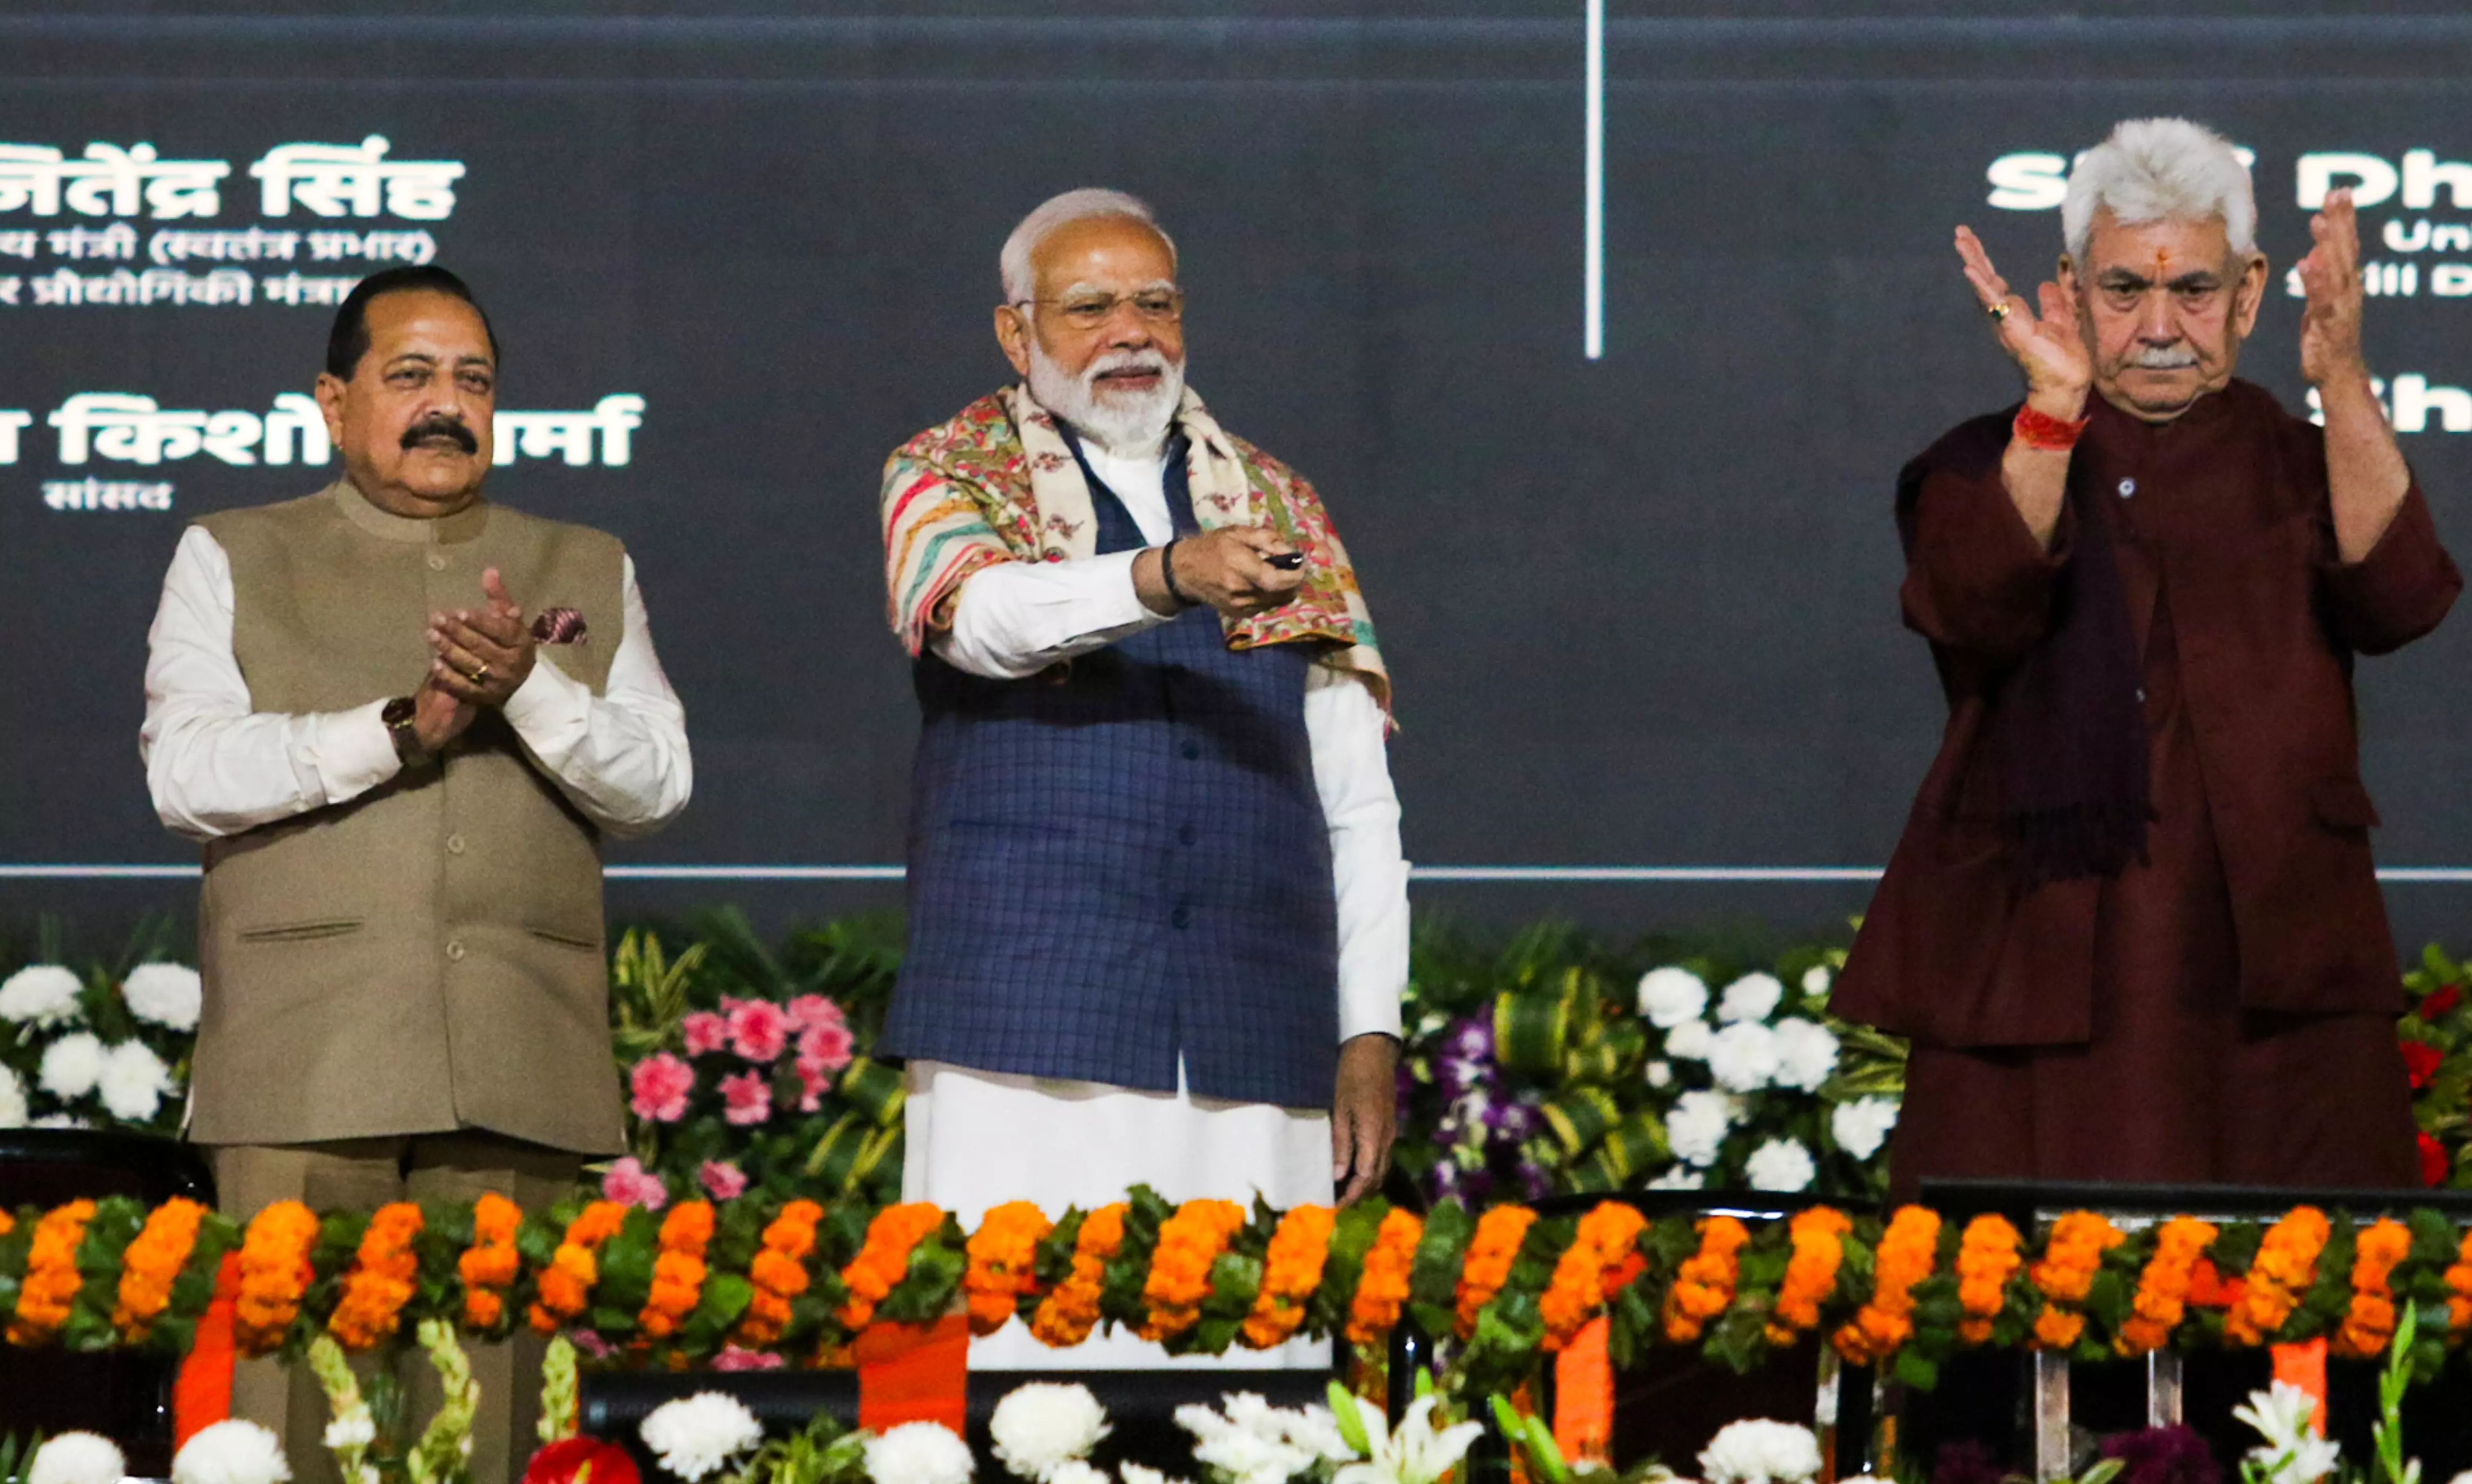 PM Modi in Jammu to launch projects worth Rs 32,000 crore